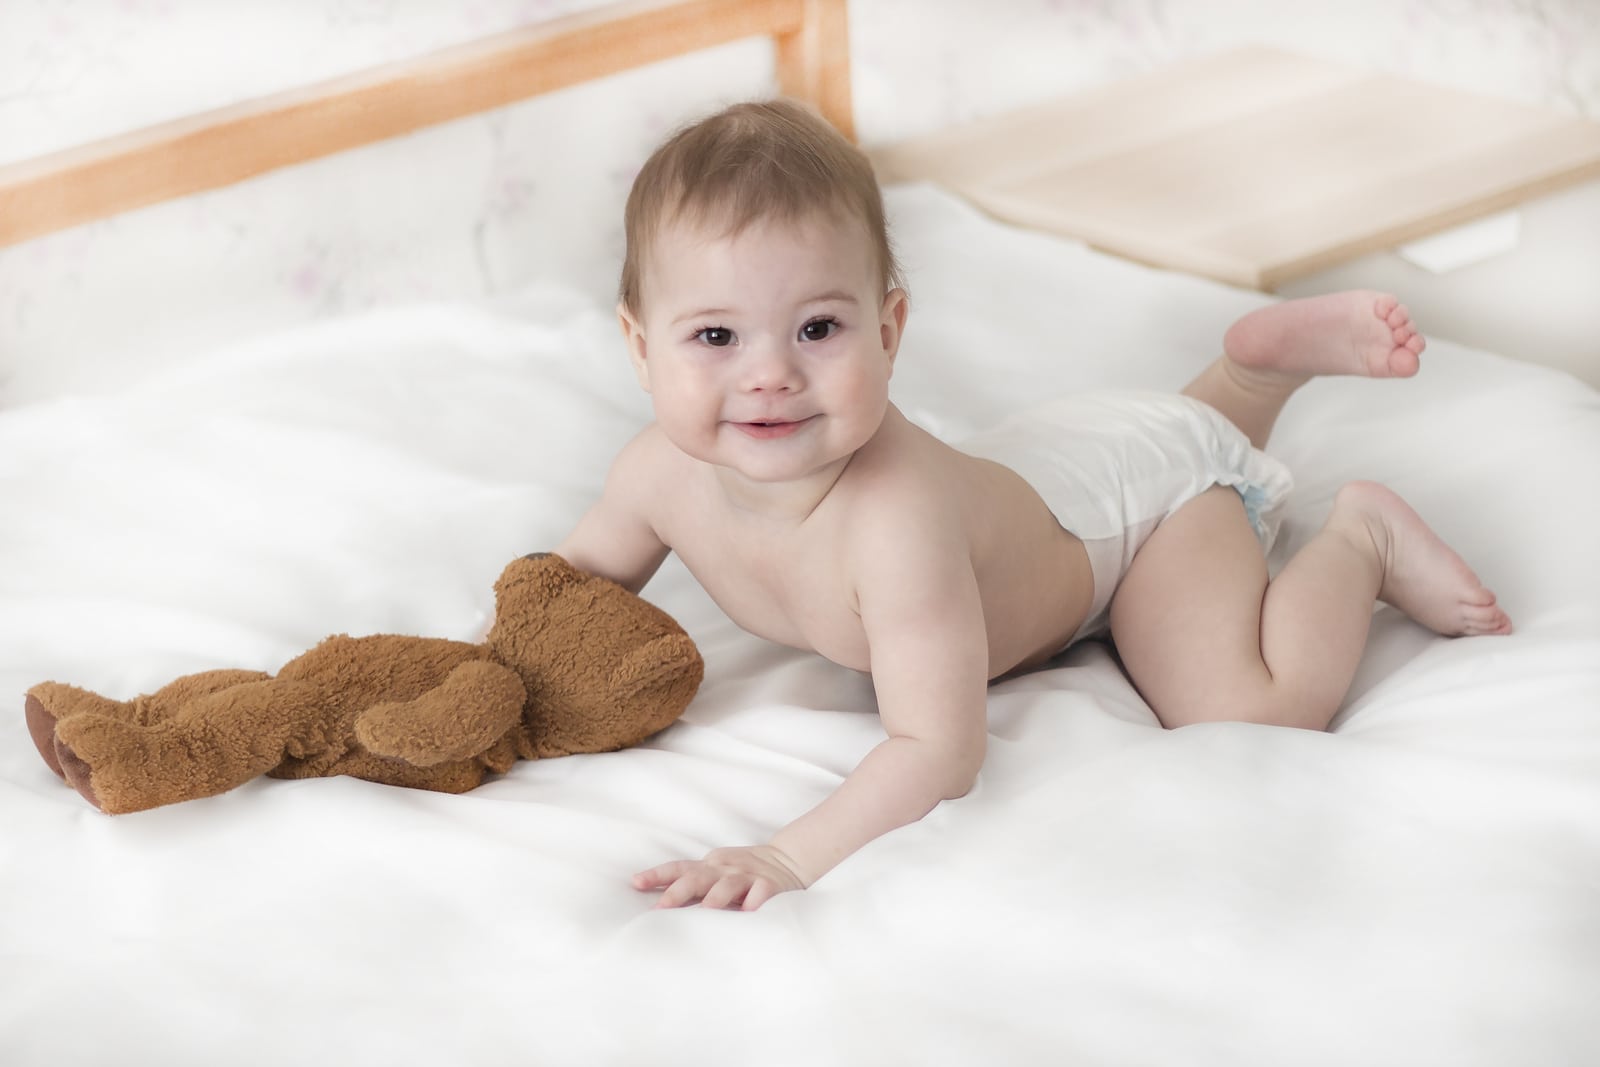 List of the Best Diapers